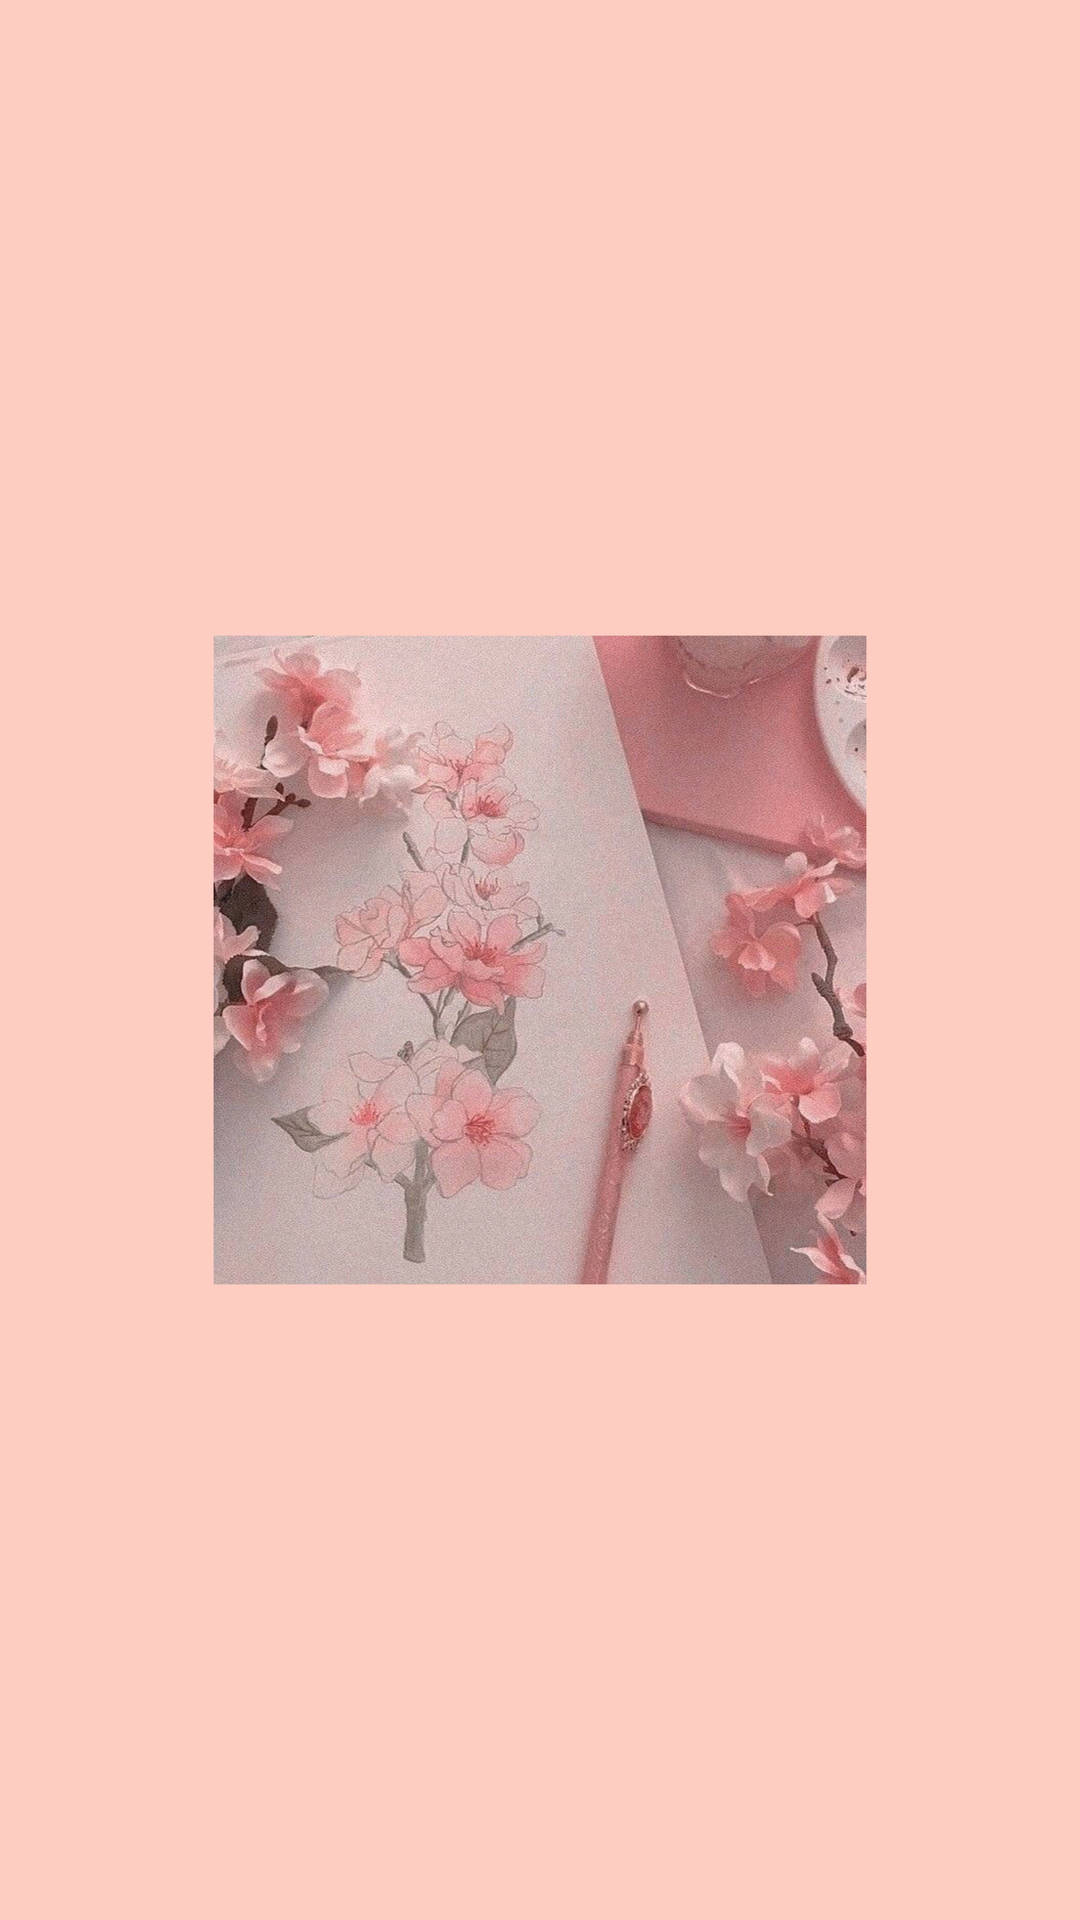 Flower With Pink Aesthetic Tumblr Laptop Wallpaper